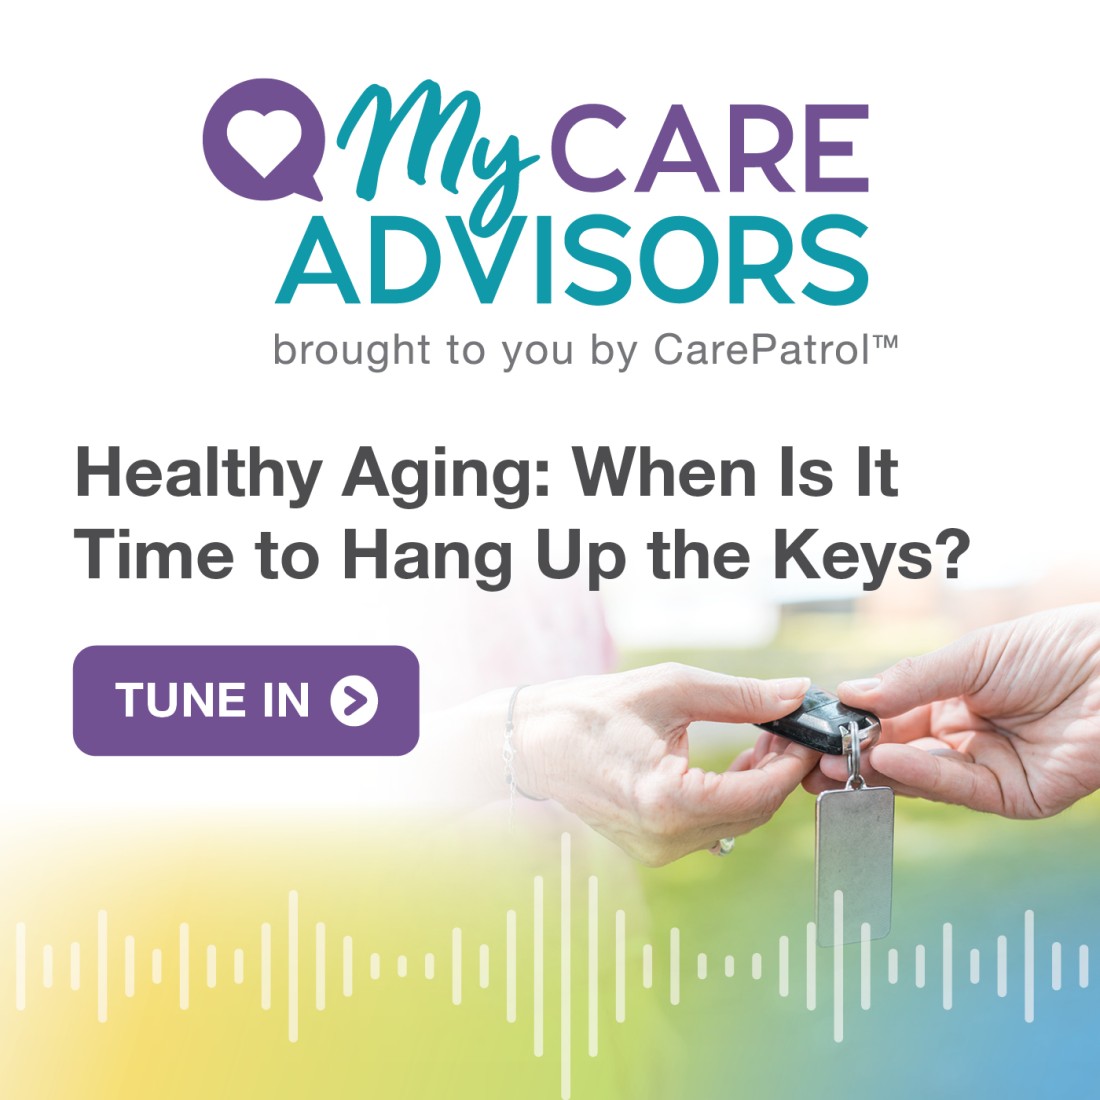 Senior Care Advisors Resources | Senior Care Solutions - Social_Media_Graphic__Healthy_Aging_When_Is_It_Time_to_Hang_Up_the_Keys